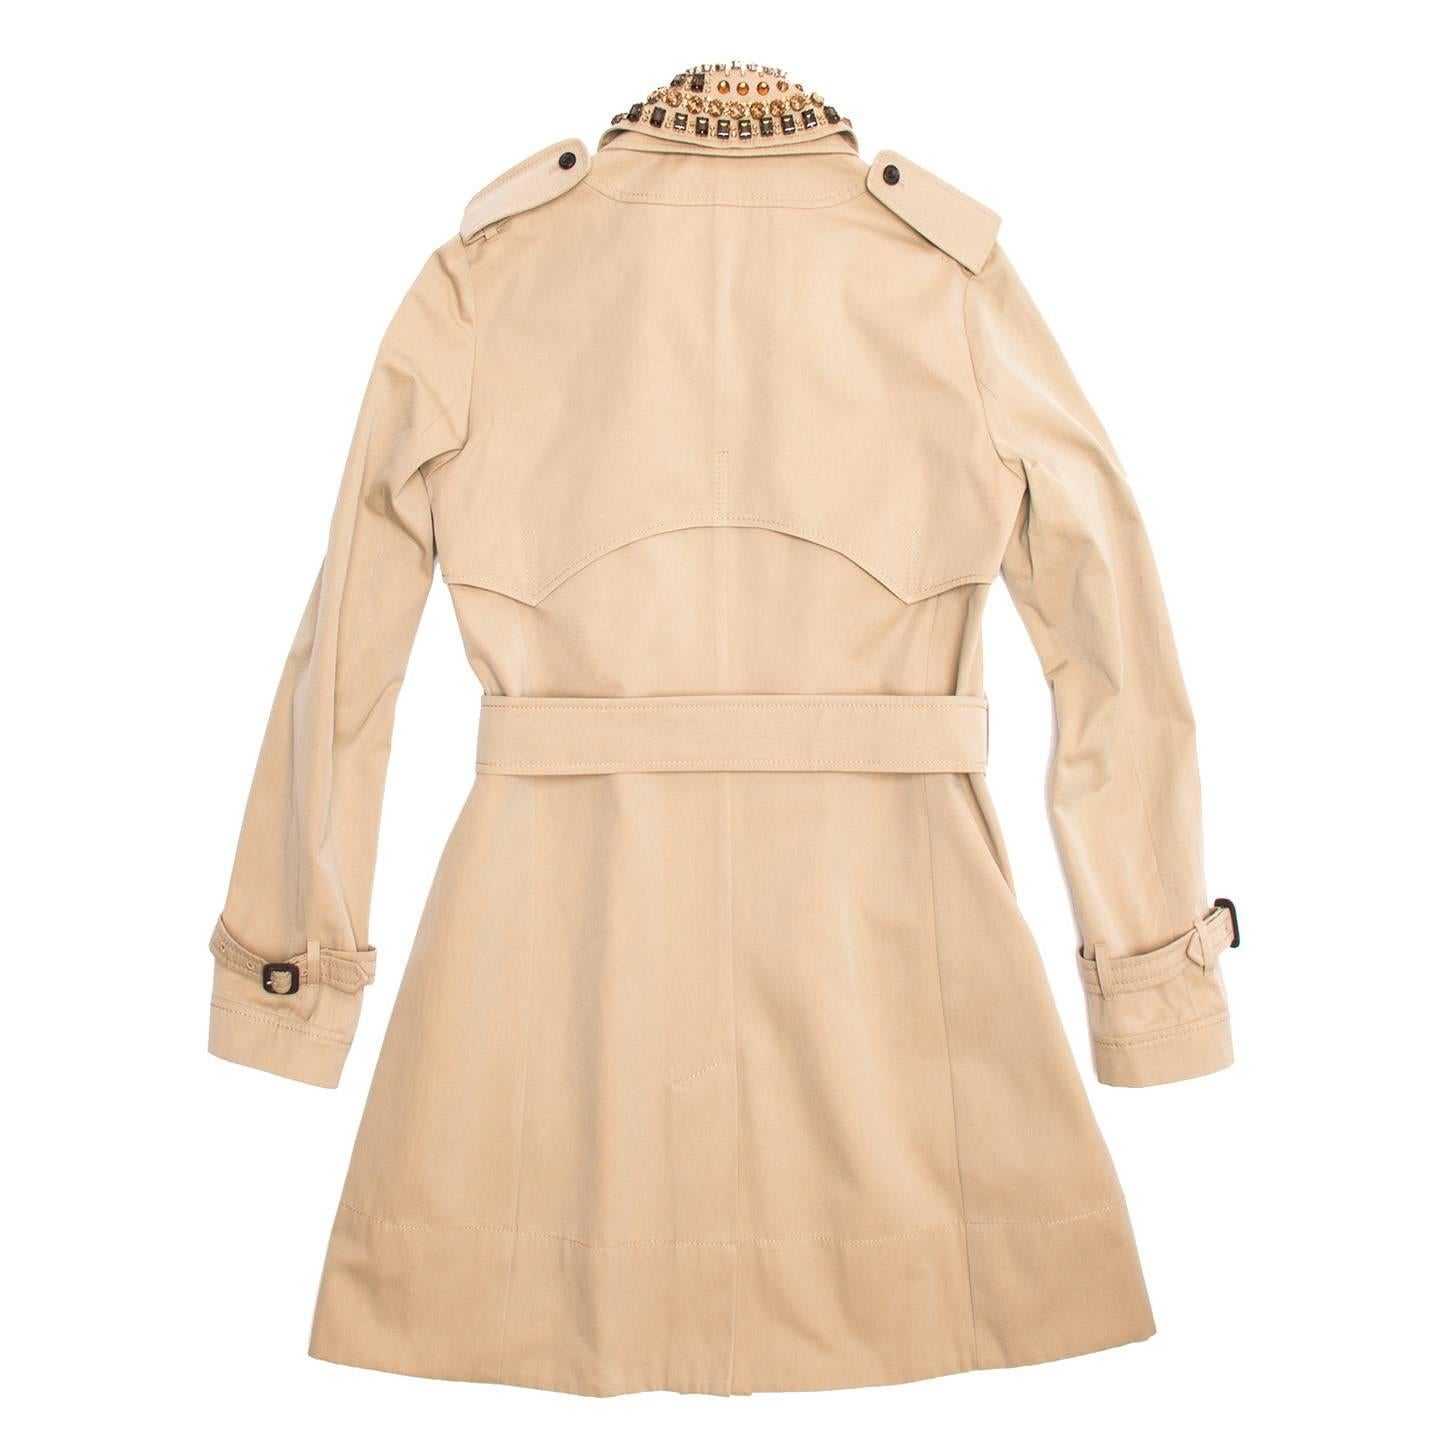 Classic knee length khaki cotton trench coat with belted waist and detachable jewel embellished collar. The front is single breasted and fastens with brown buttons like the smaller ones on the pockets. The cuffs are belted as well and enriched with